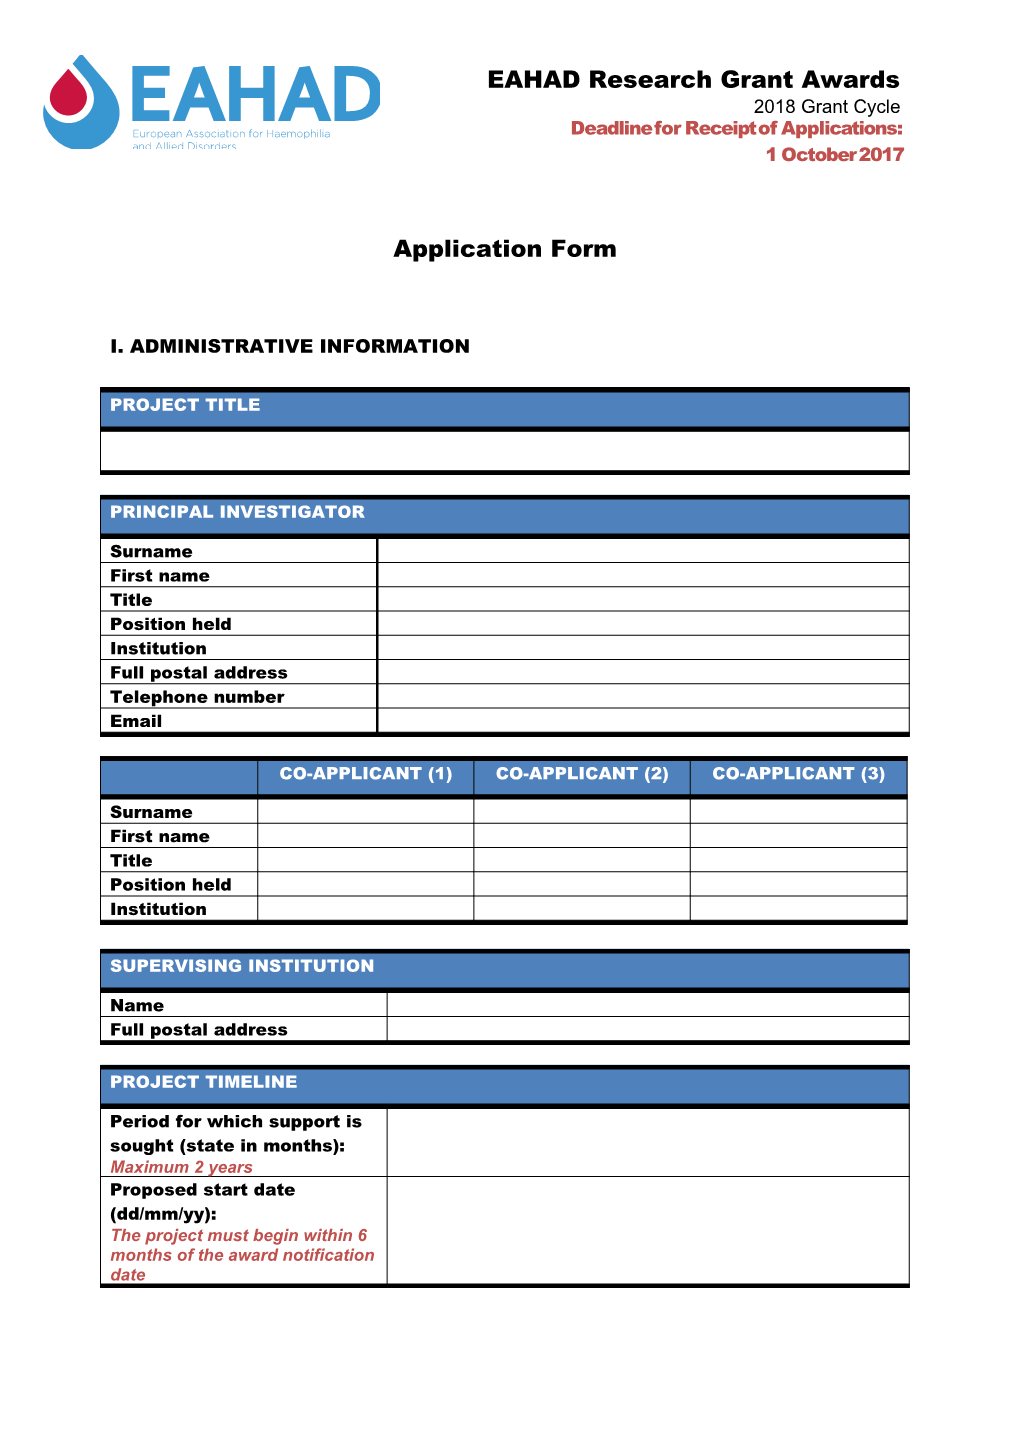 Application Form s24